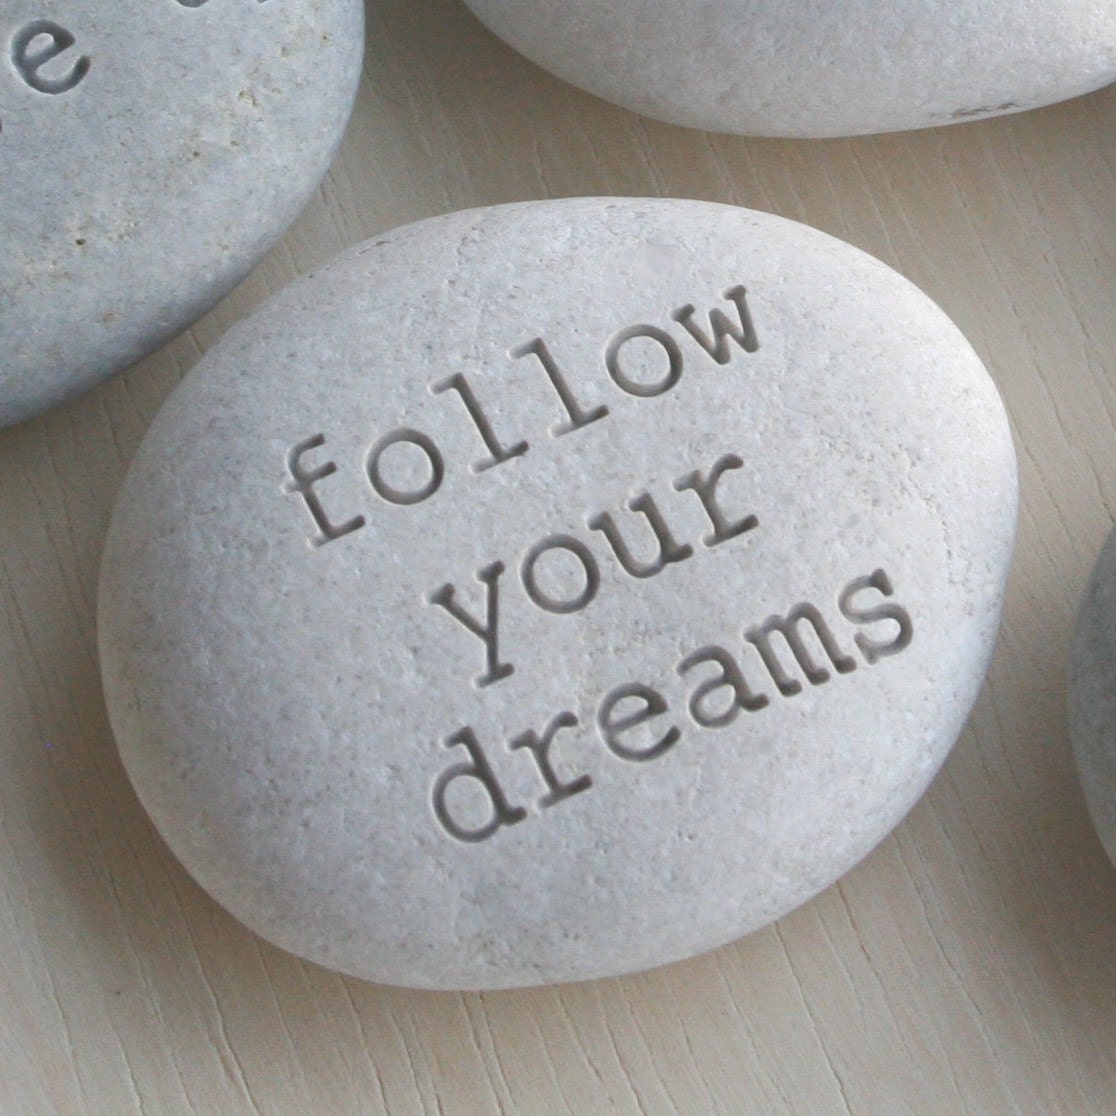 follow your dreams - Message Stone by sjEngraving